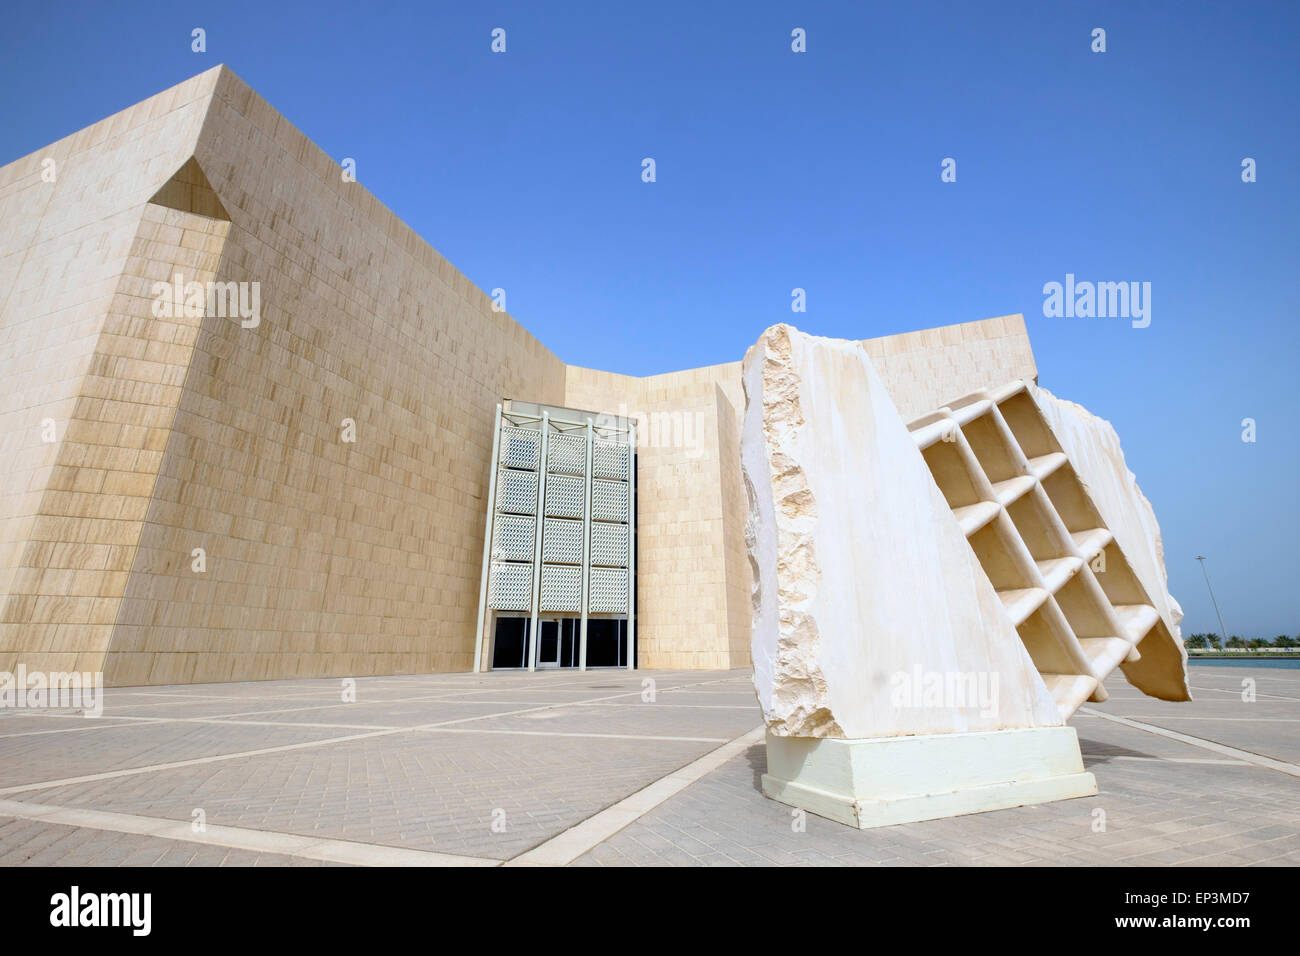 Ansicht des Nationalmuseums in Manama, Bahrain Stockfoto